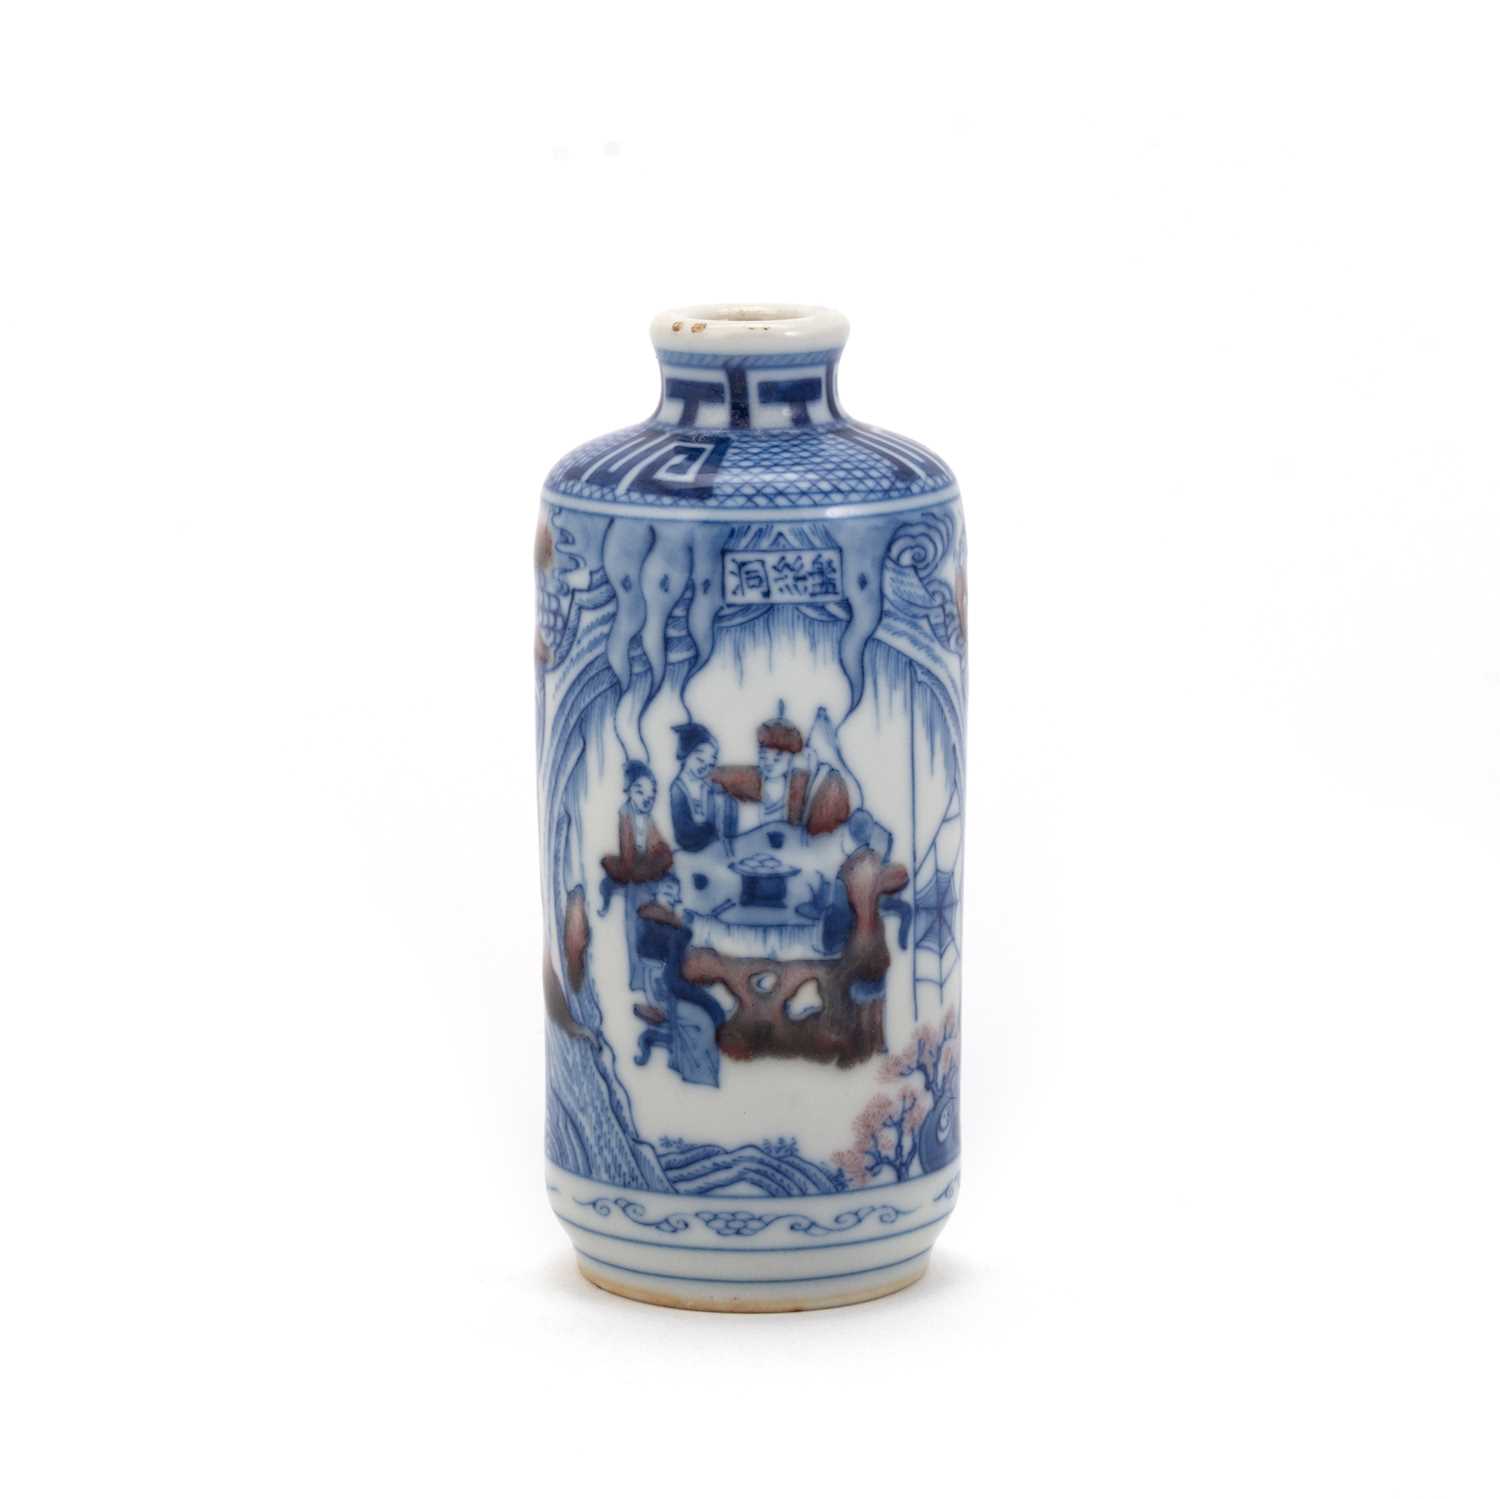 Lot 148 - A CHINESE COPPER-RED, BLUE AND WHITE PORCELAIN SNUFF BOTTLE